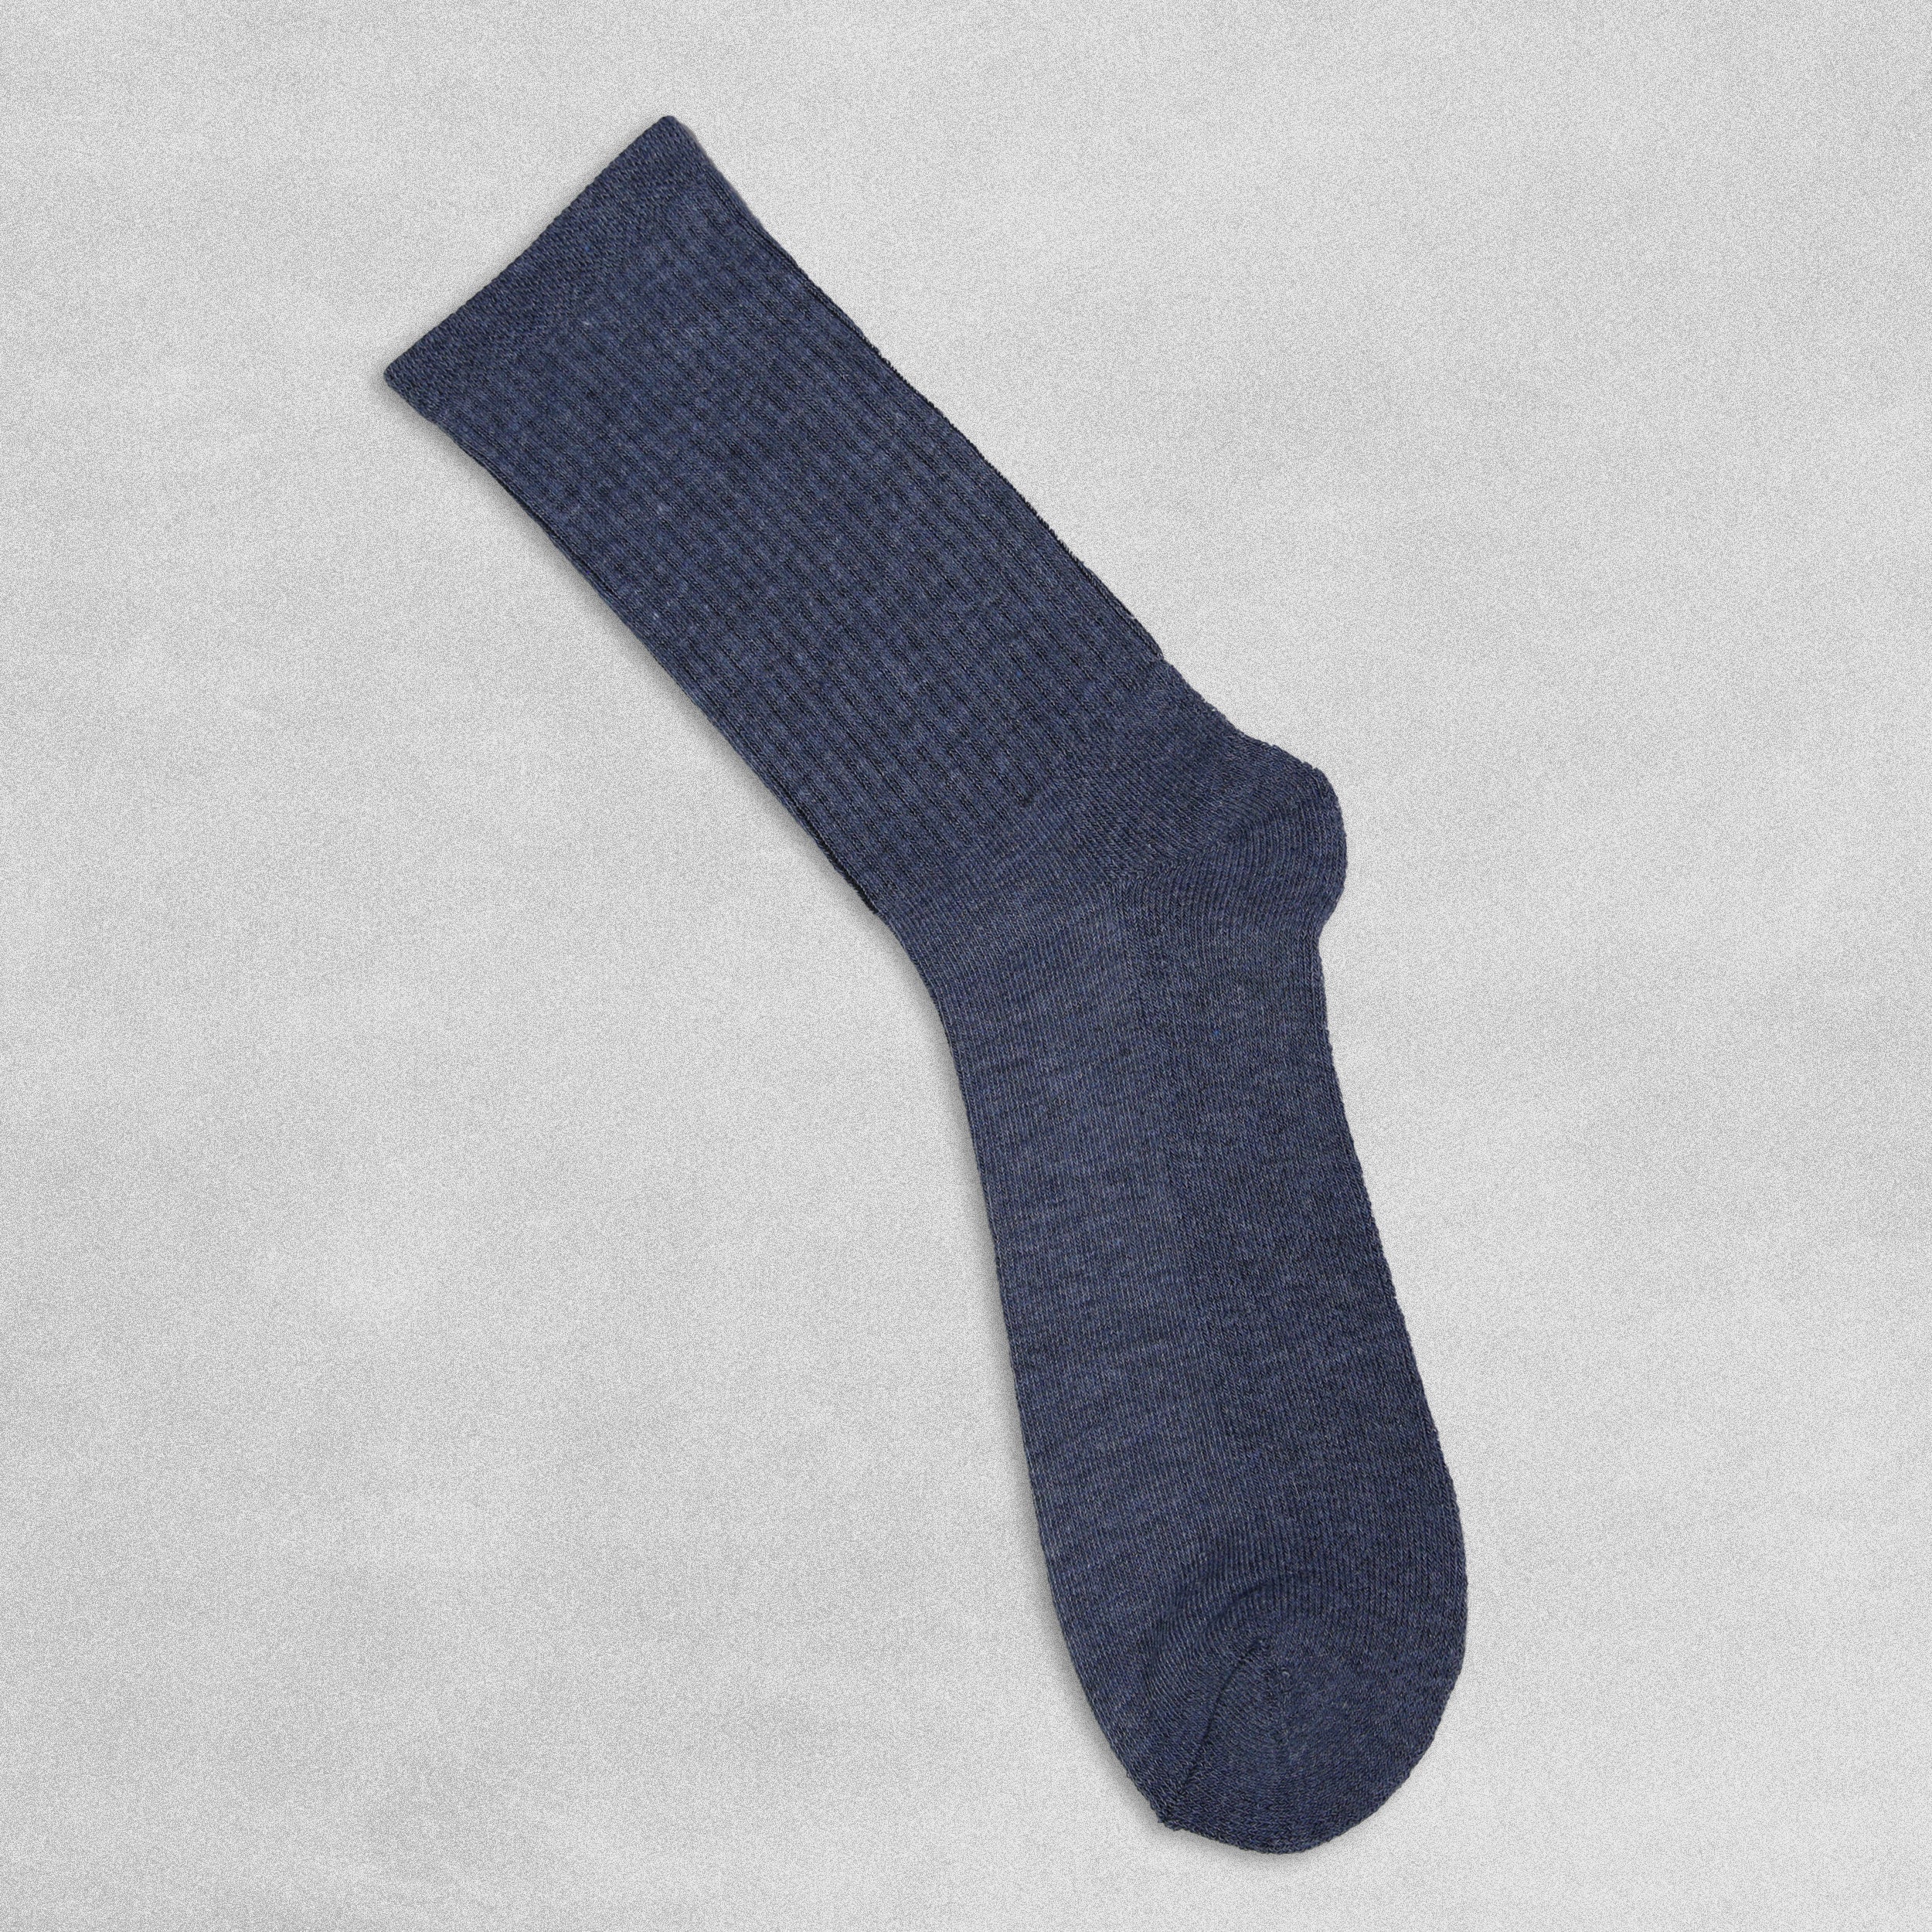 SOHOW1 - Mens Crew Socks Assorted Colours Size 41-46 (UK 7-11) - 5 Pairs